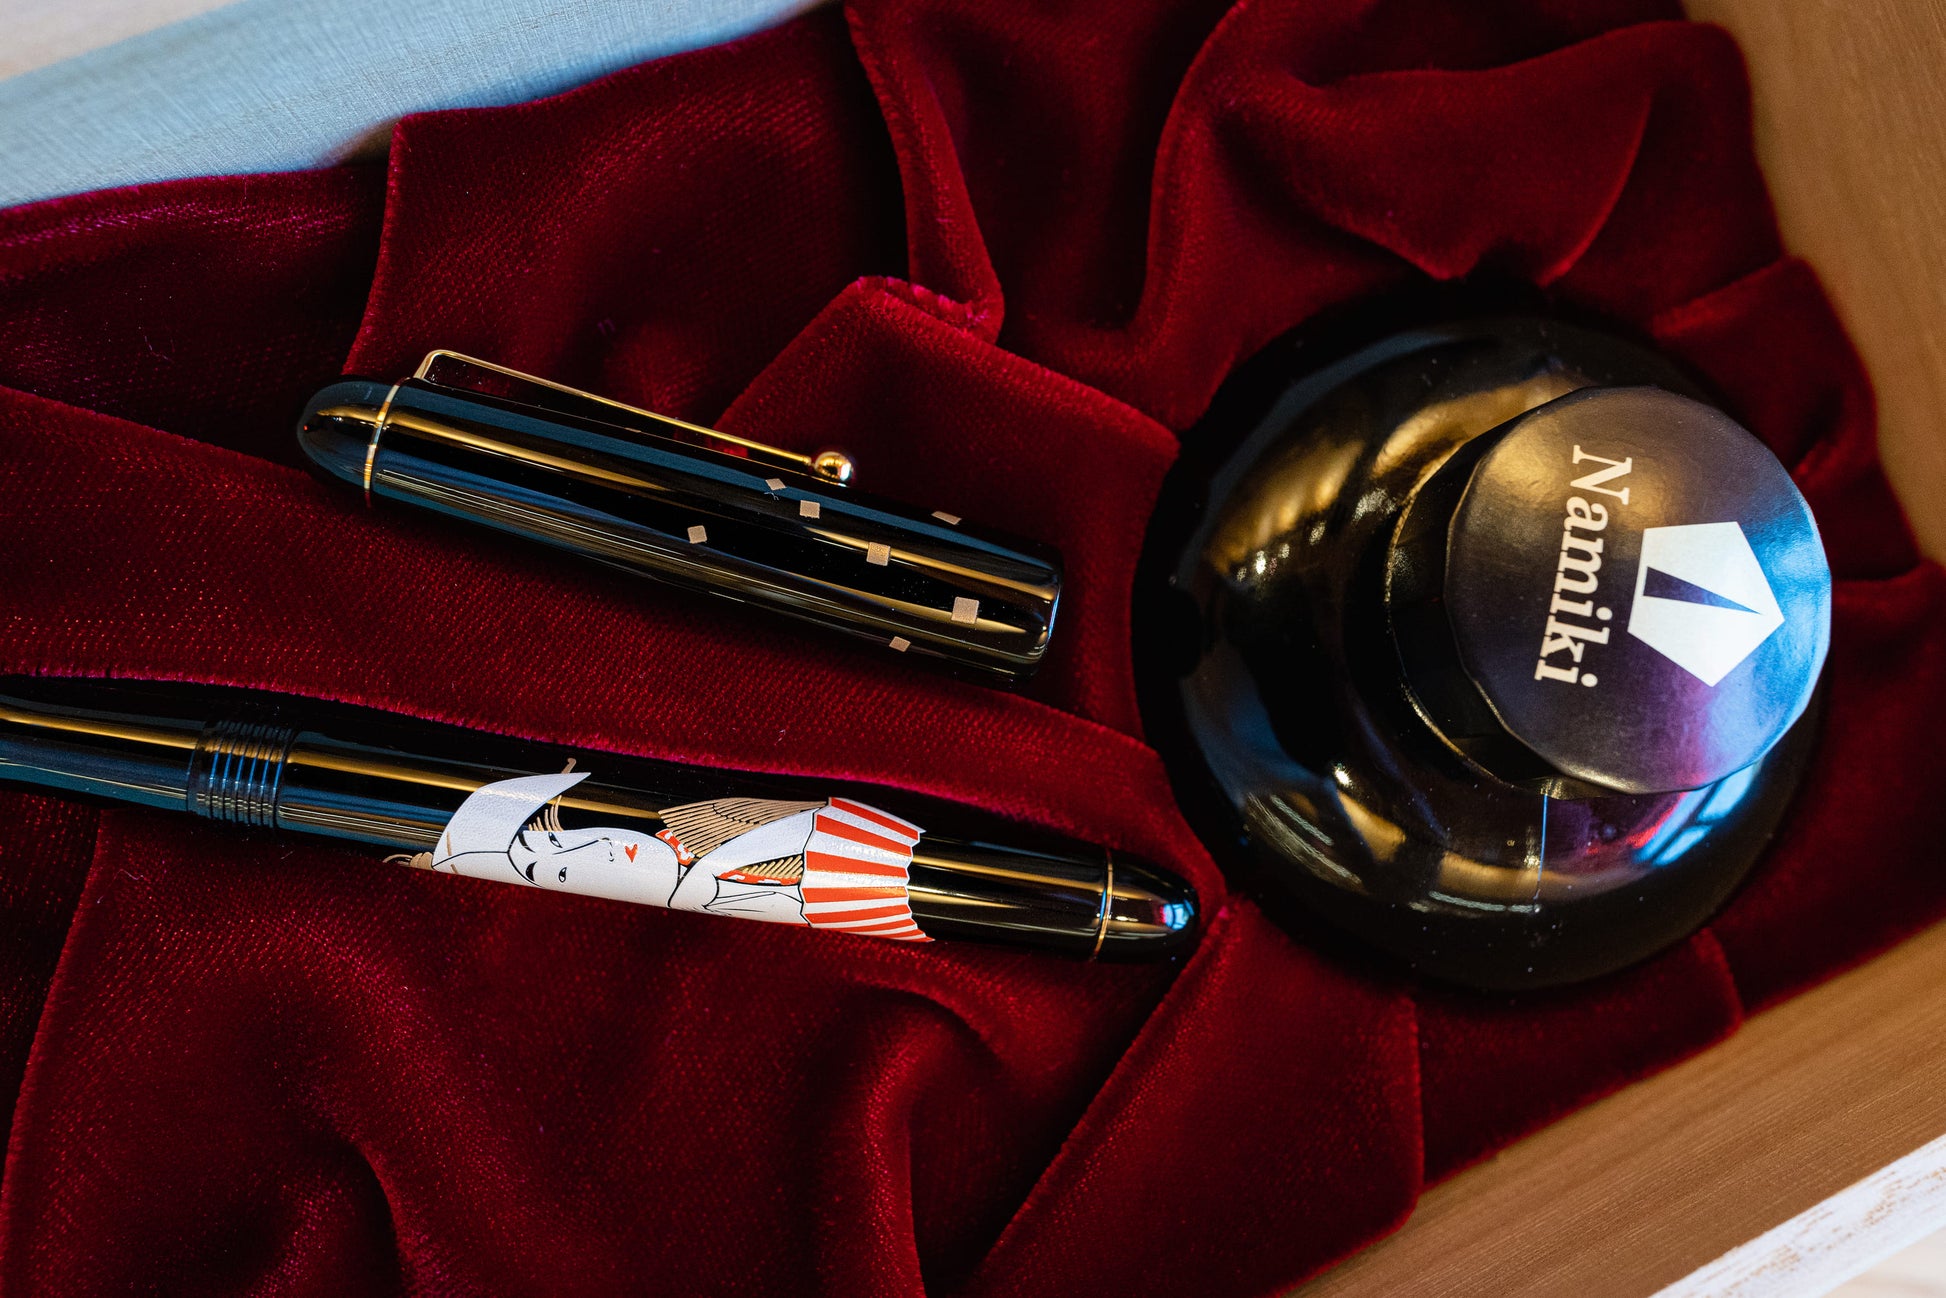 Foutain pen Namiki Tradition and ink bottle